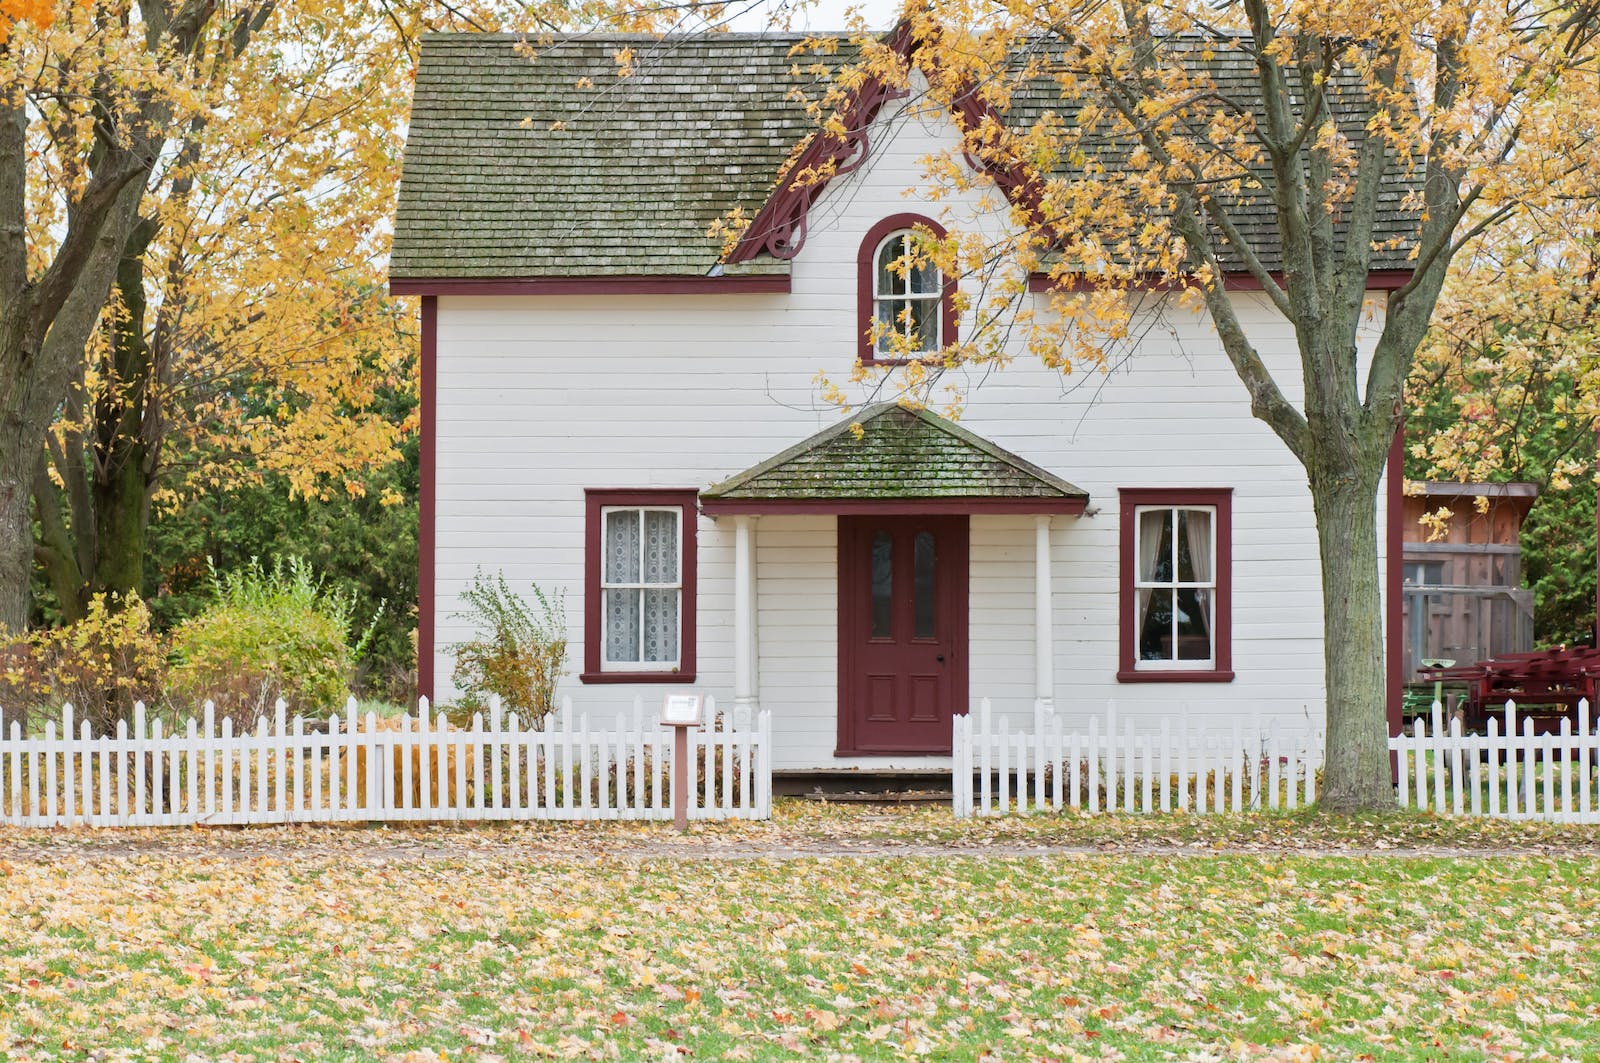 4 Signs You’re Ready to Buy a Home